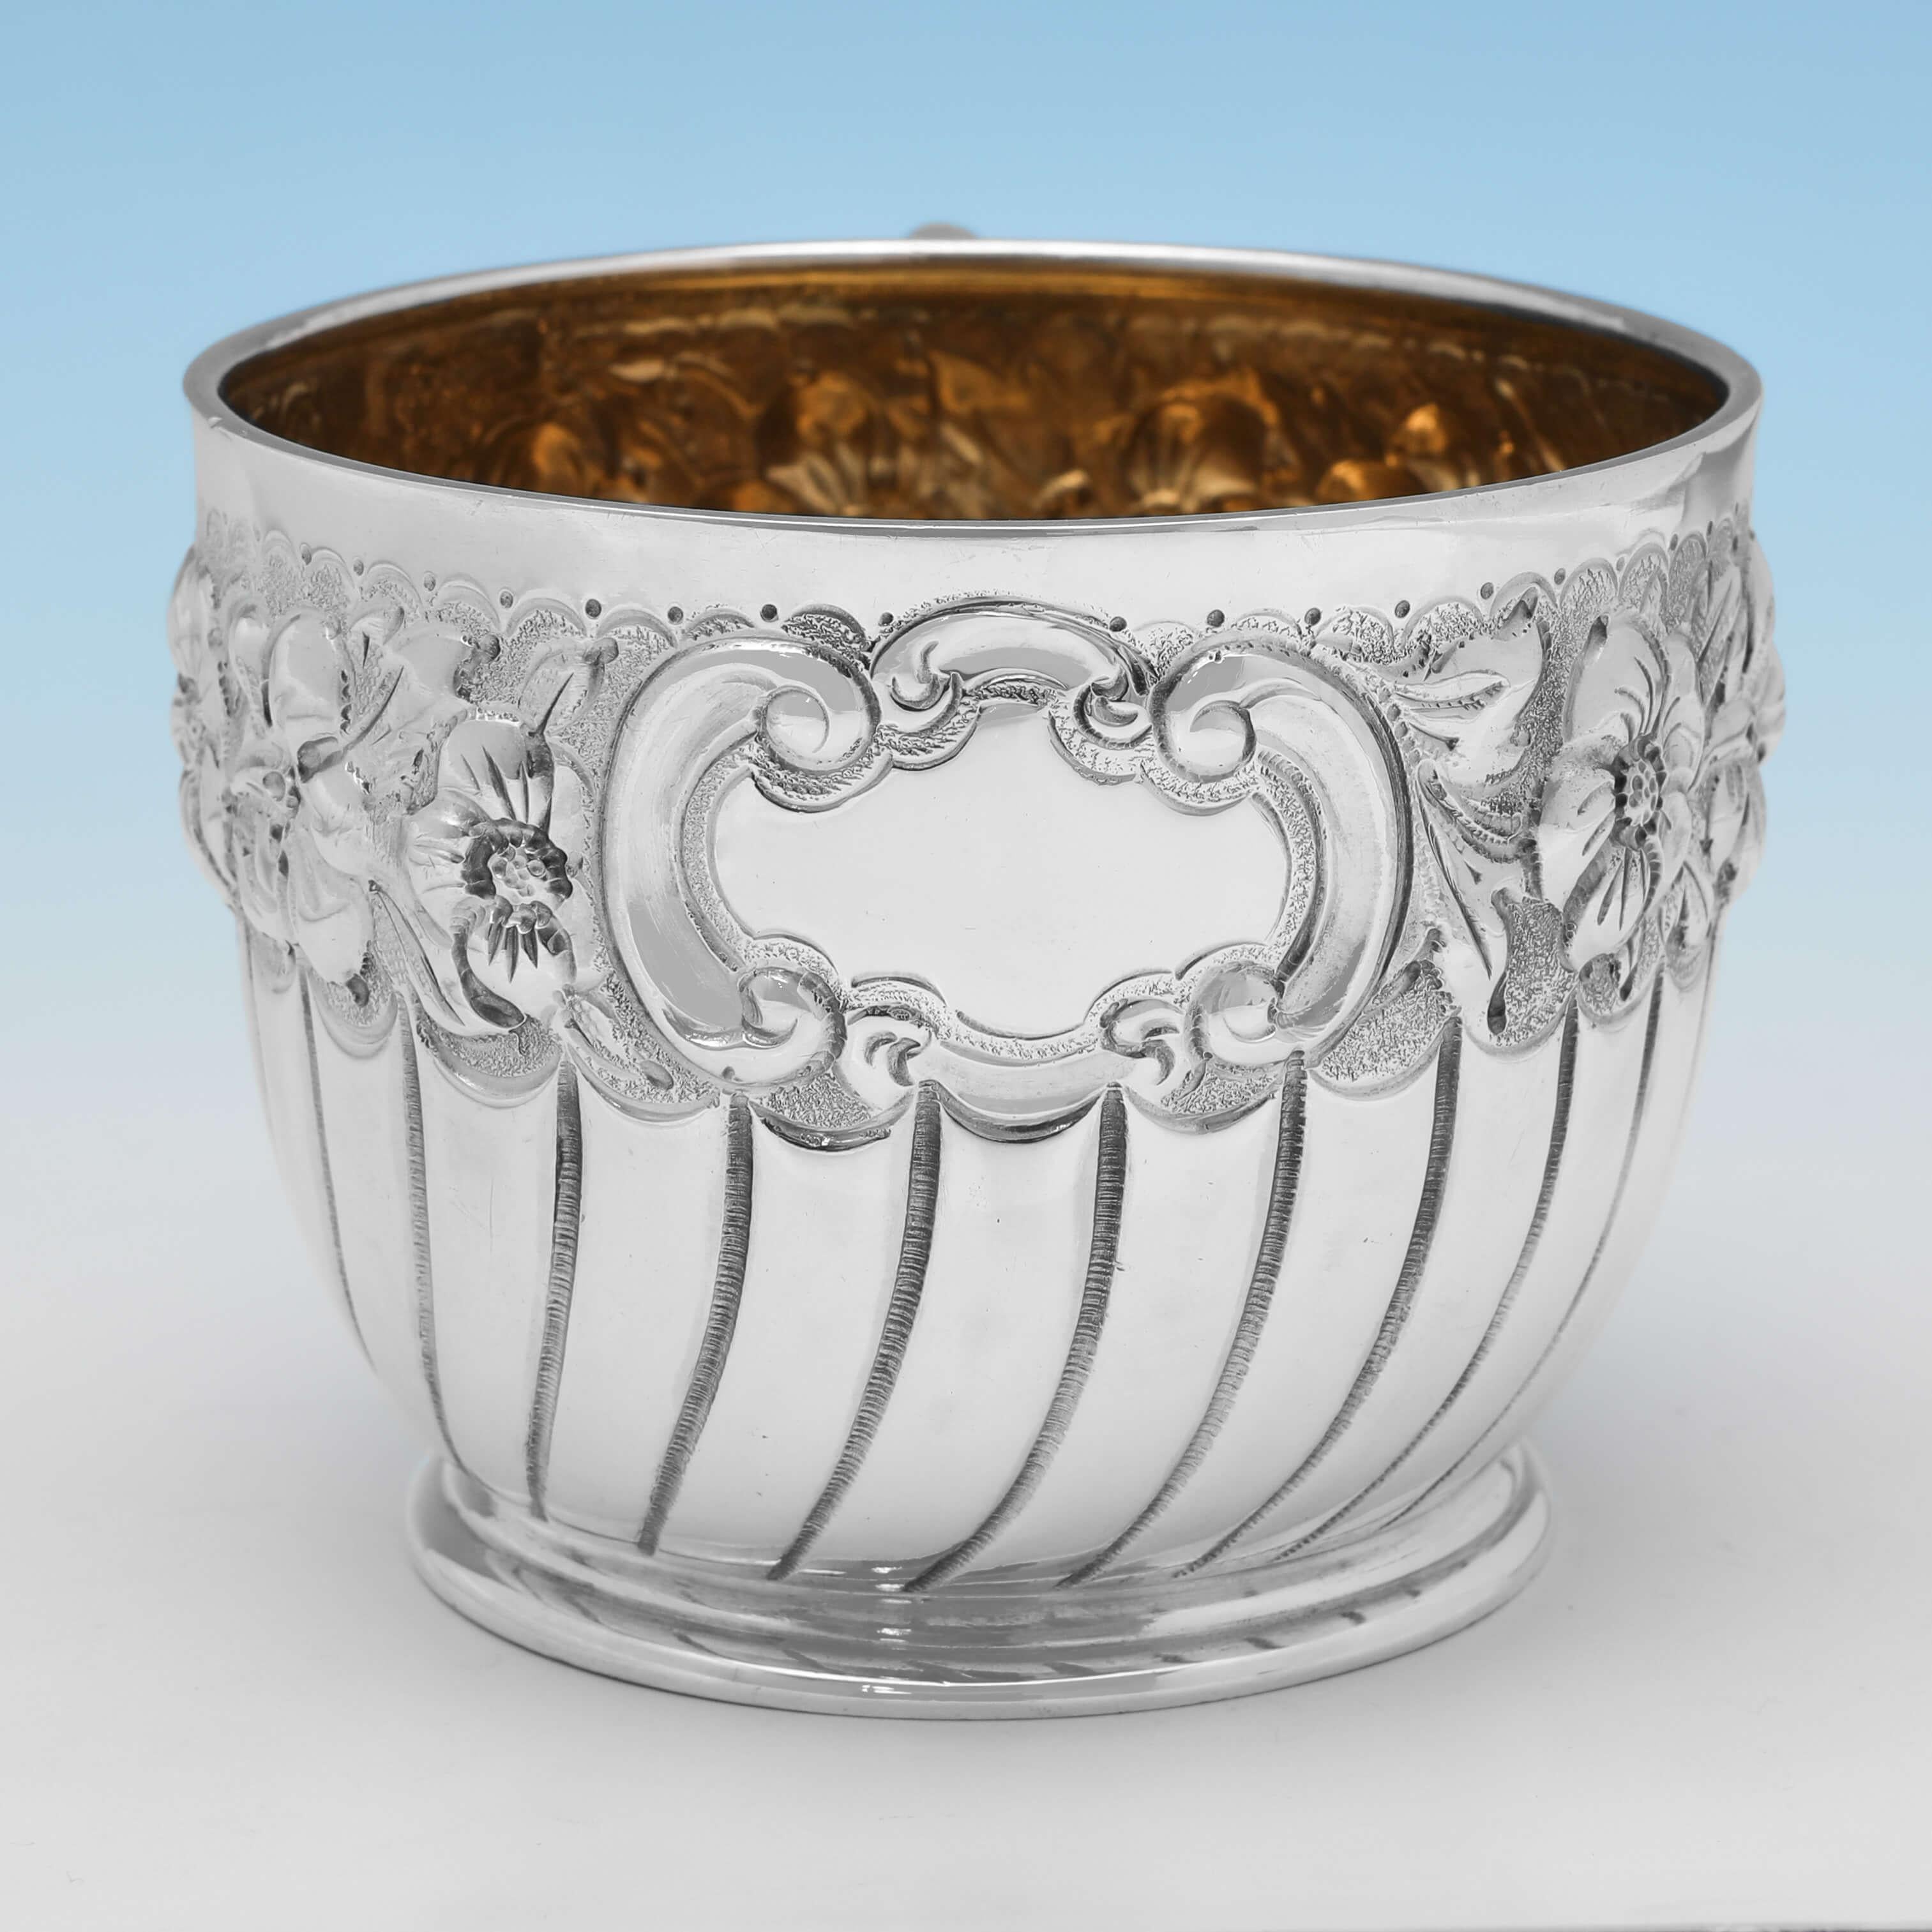 Hallmarked in London in 1896 by Charles Edwards, this attractive, Antique Sterling Silver Christening Mug, features swirled half fluting, a chased floral border and a gilt interior. 

The christening mug measures 2.5